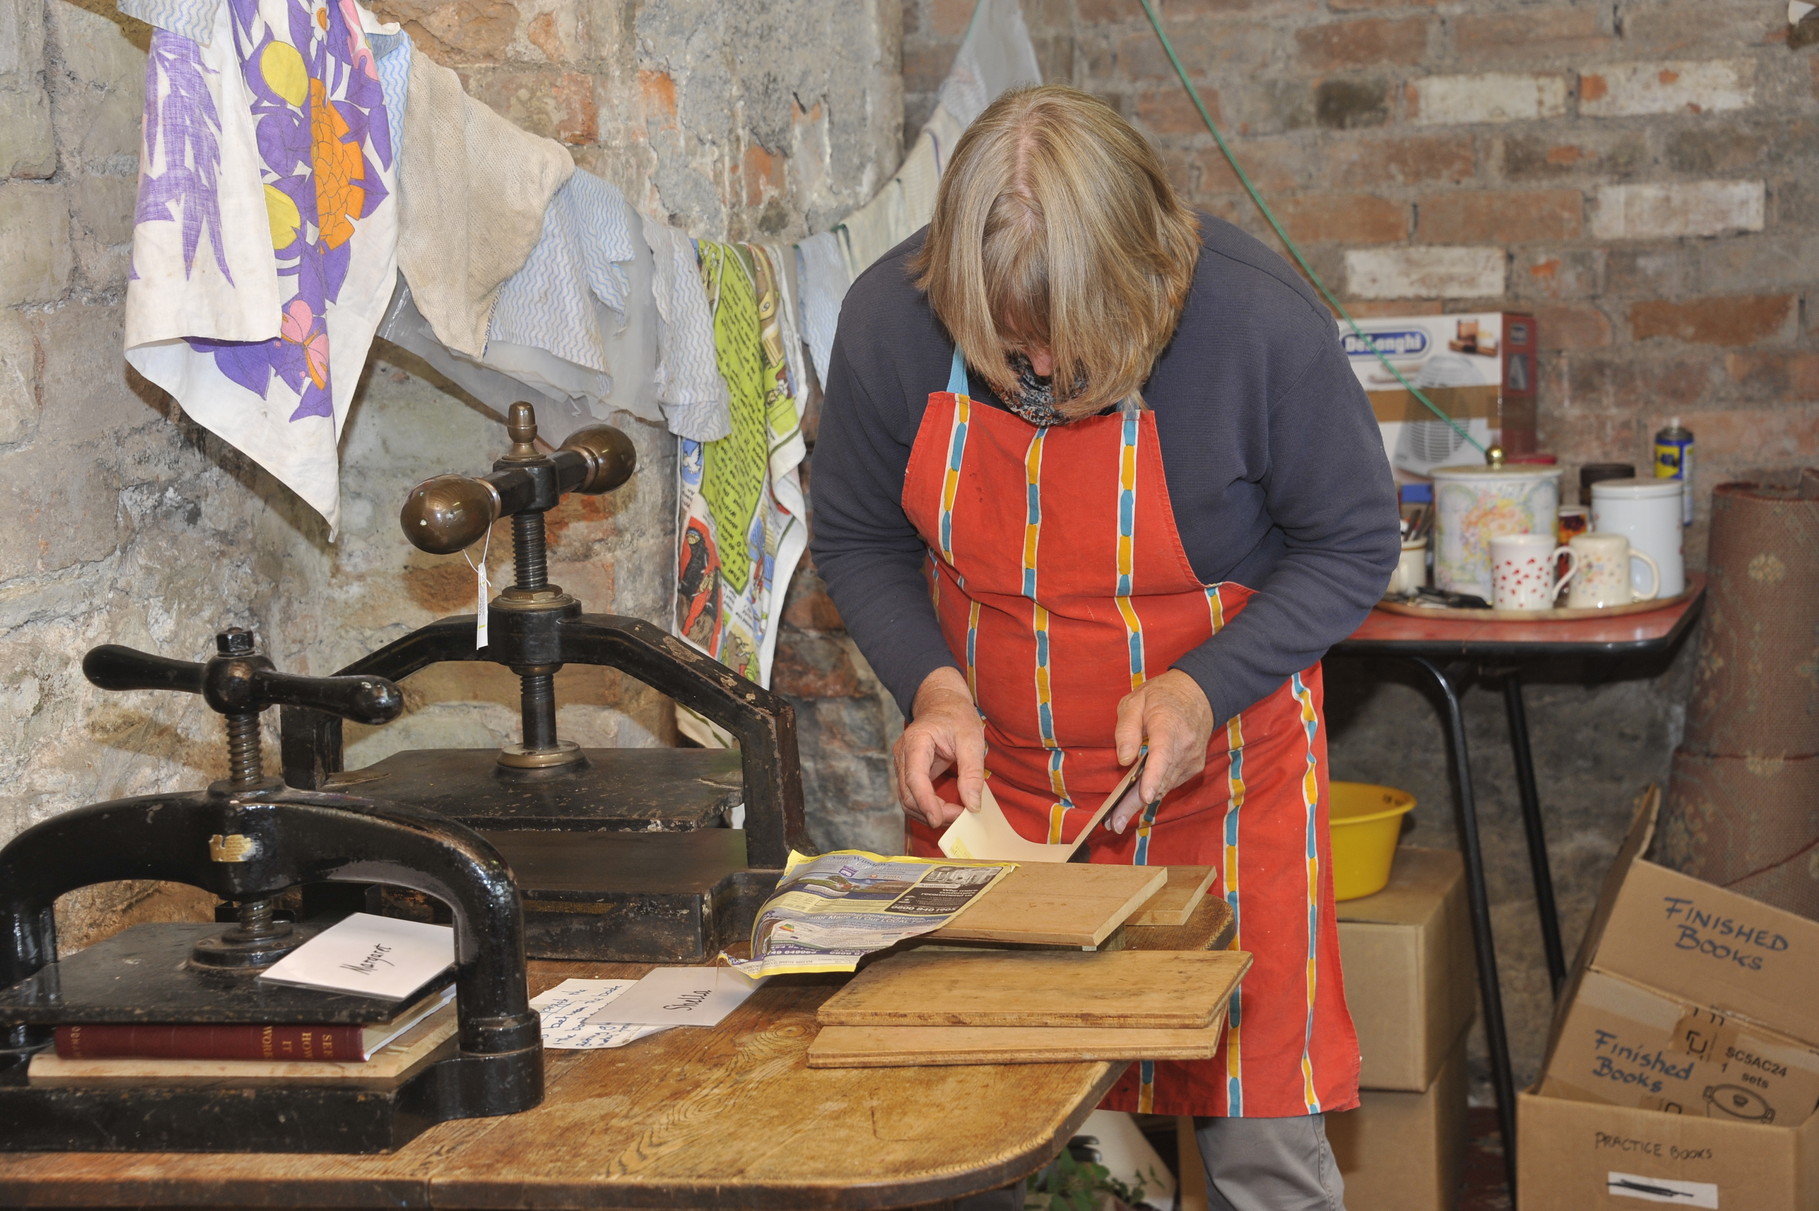 Members of the bookbinding team lovingly restore worse-for-wear books at our very own bindery...